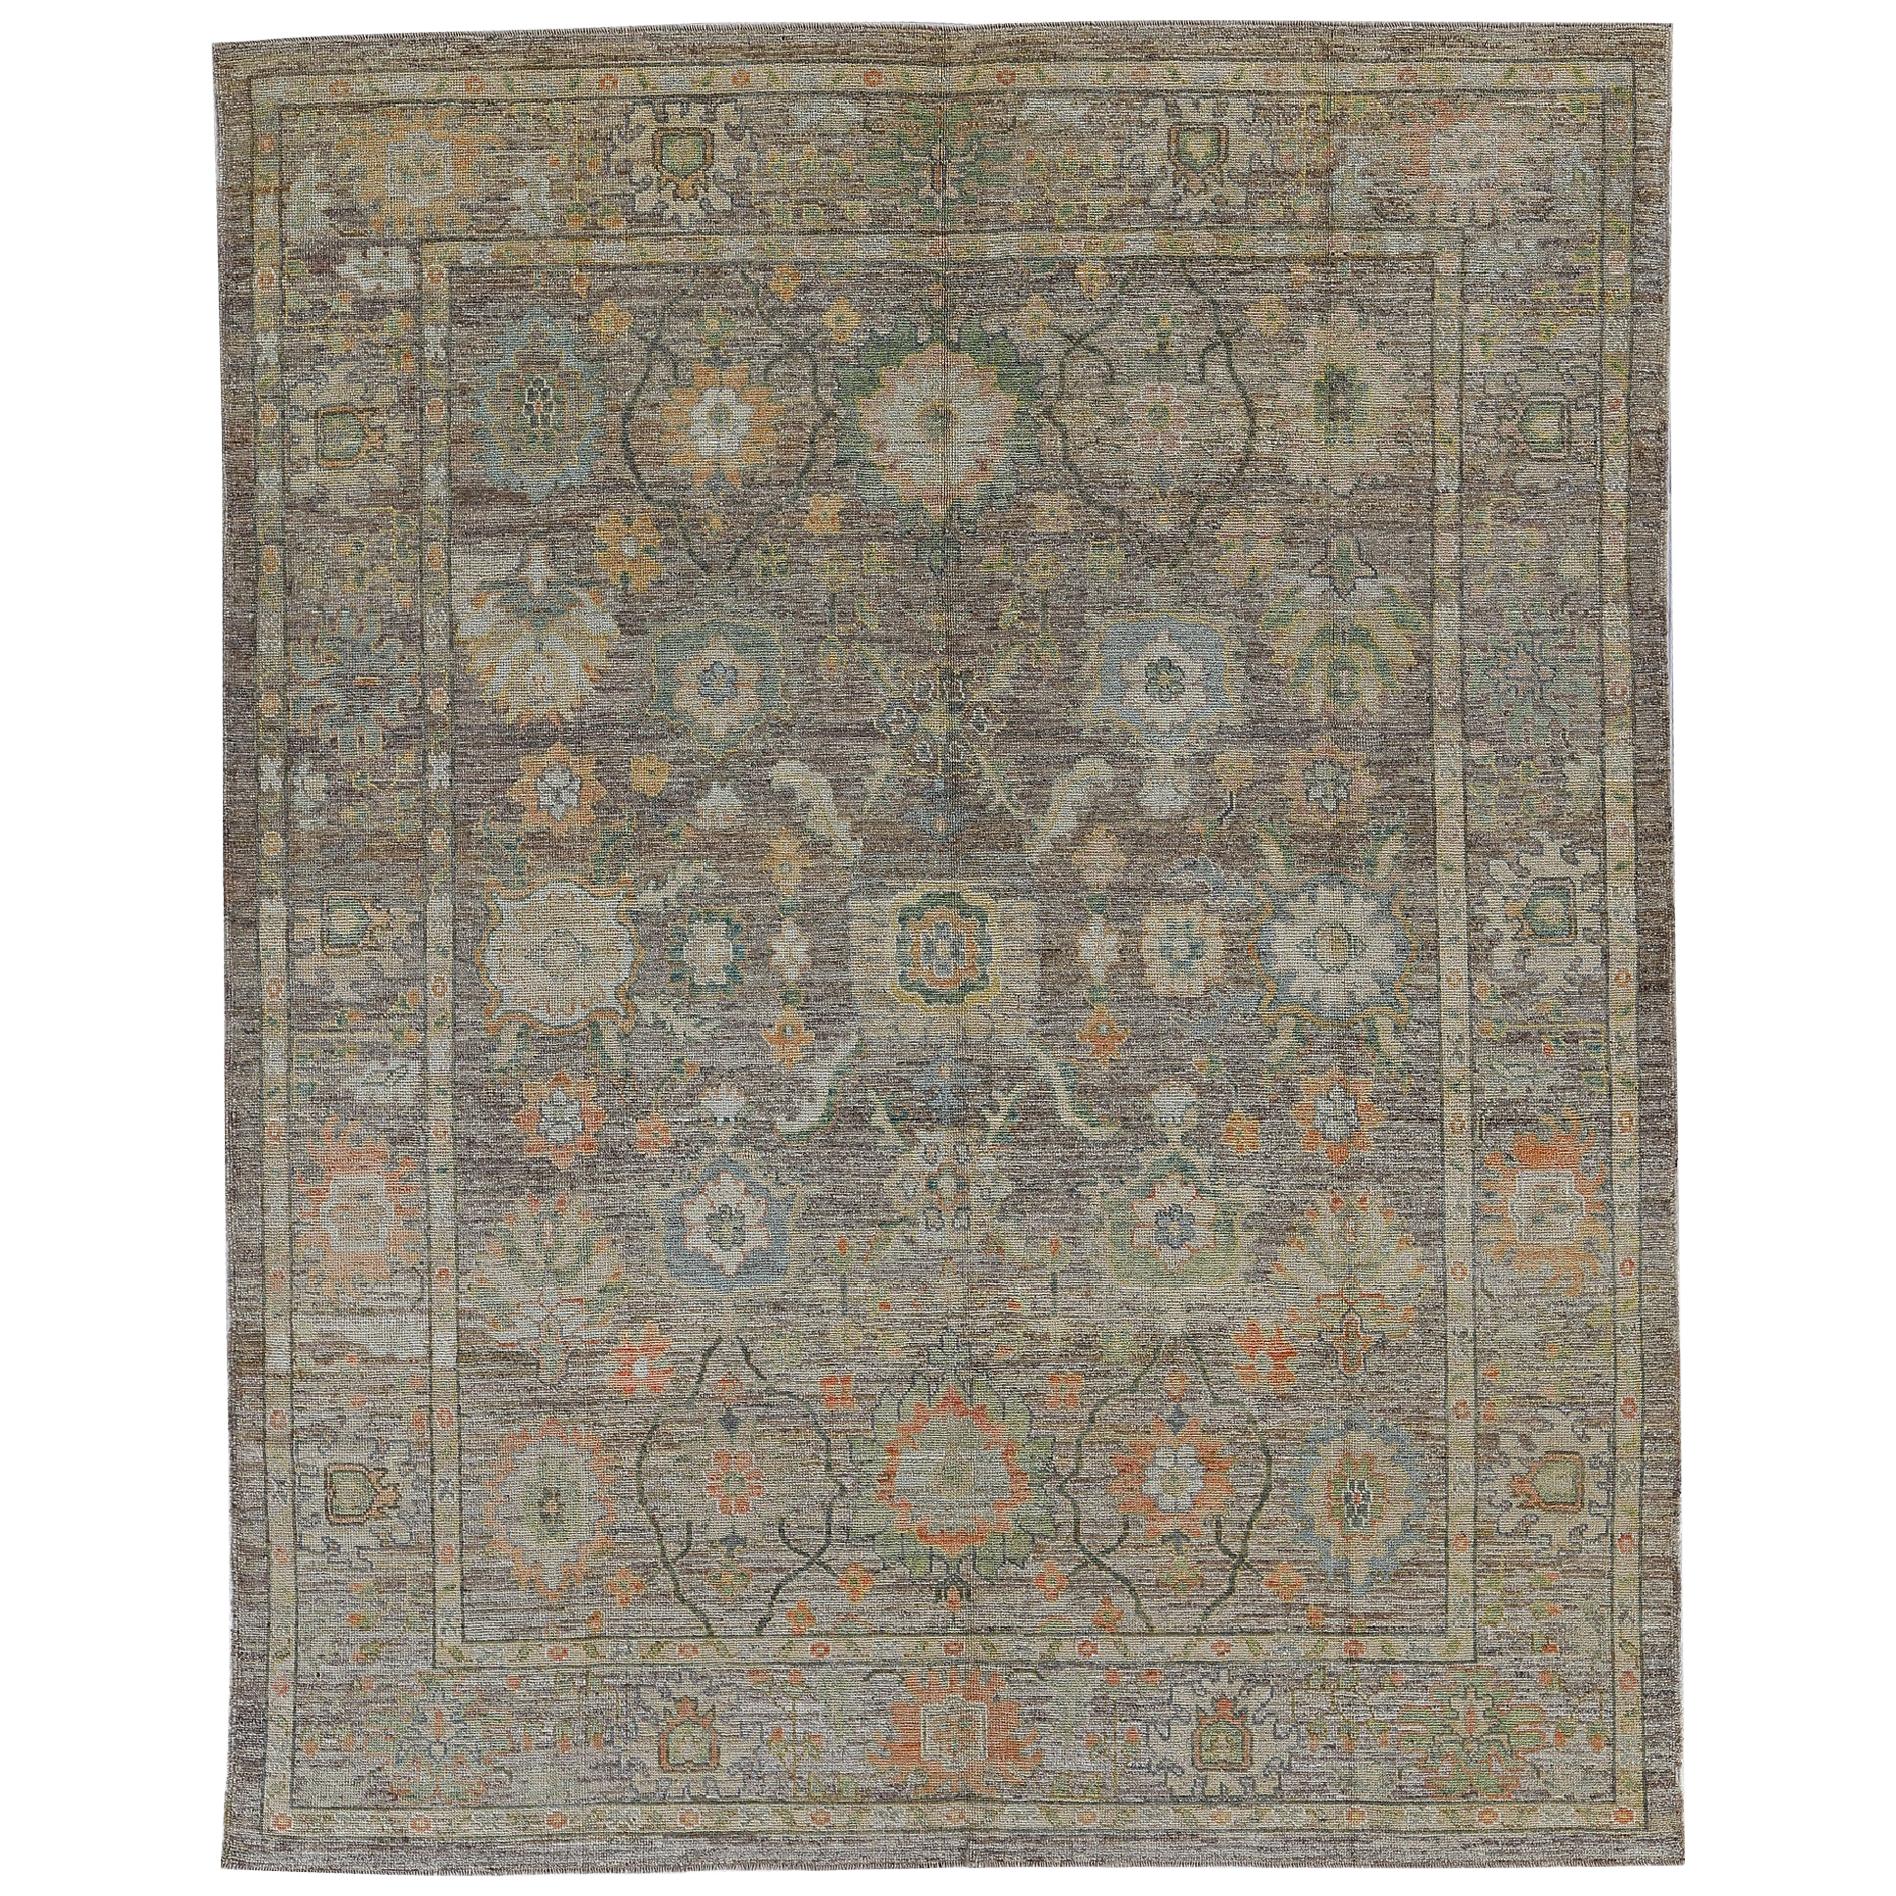 Nazmiyal Collection Green Modern Turkish Oushak Rug 10 ft 7 in x 13 ft 5 in